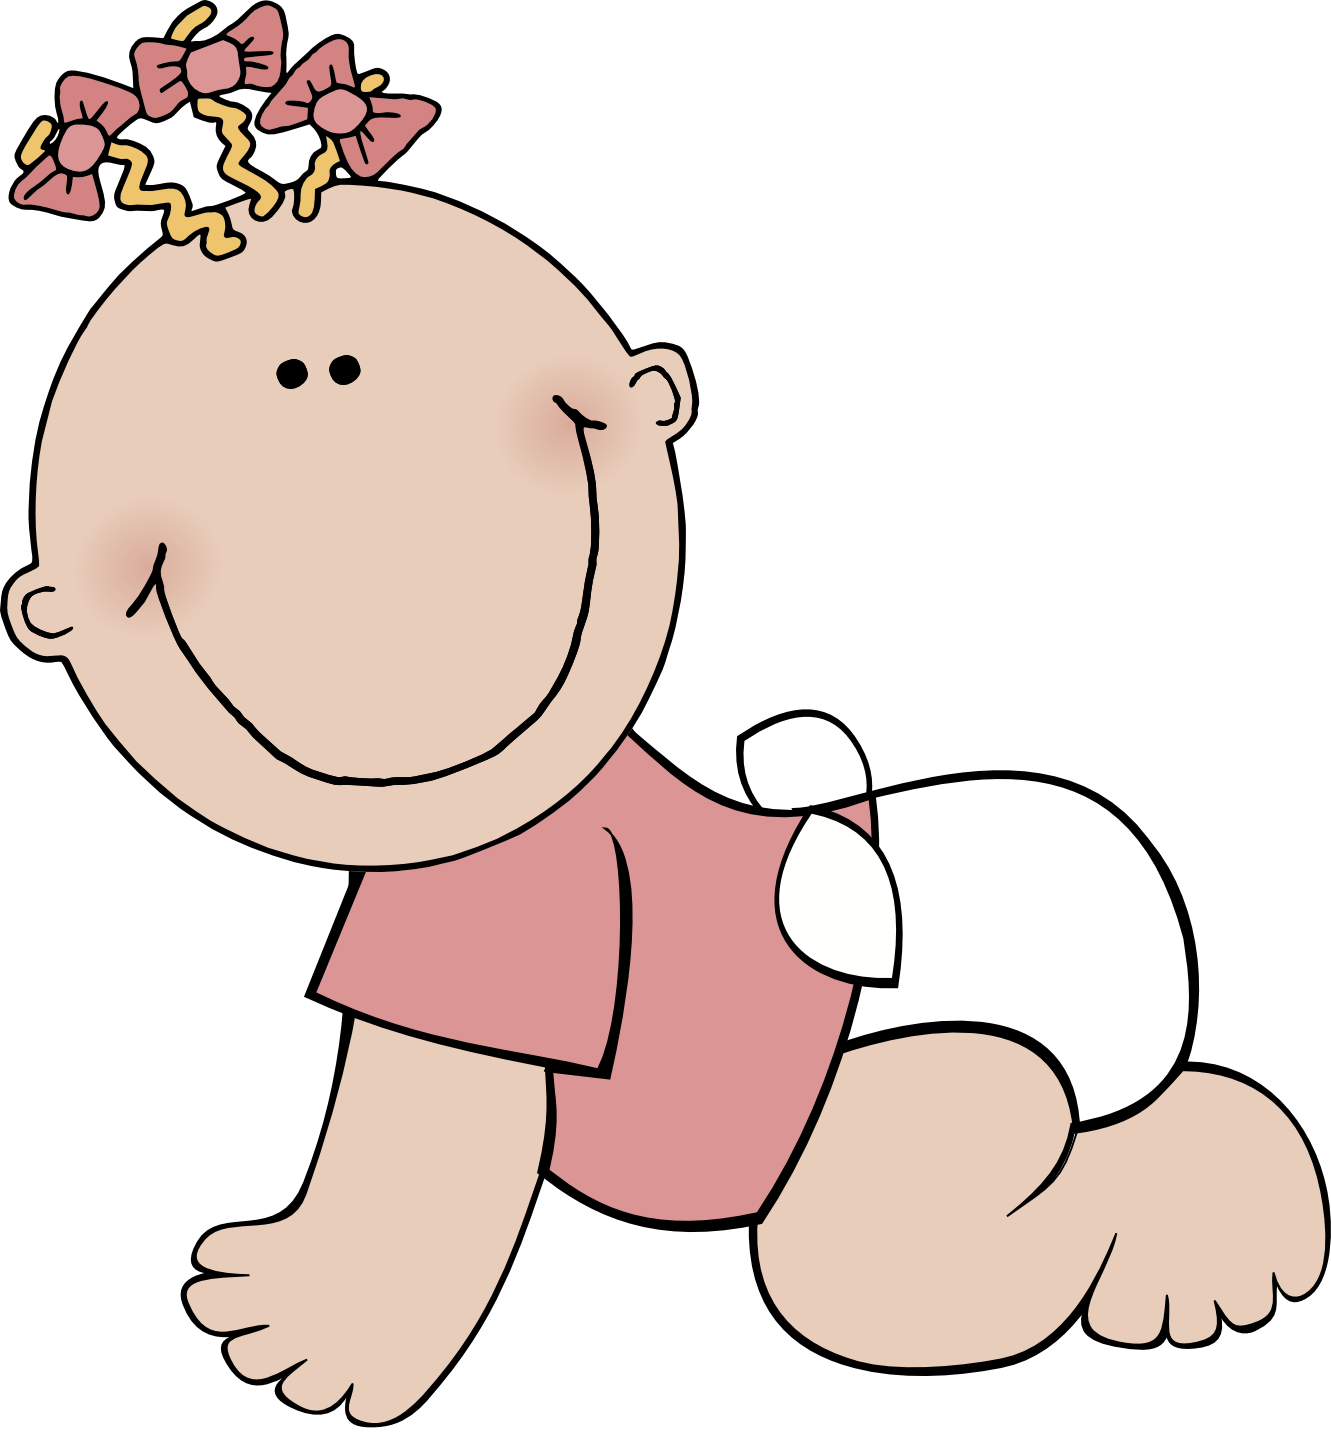 Infant clipart little baby. Girl panda free images